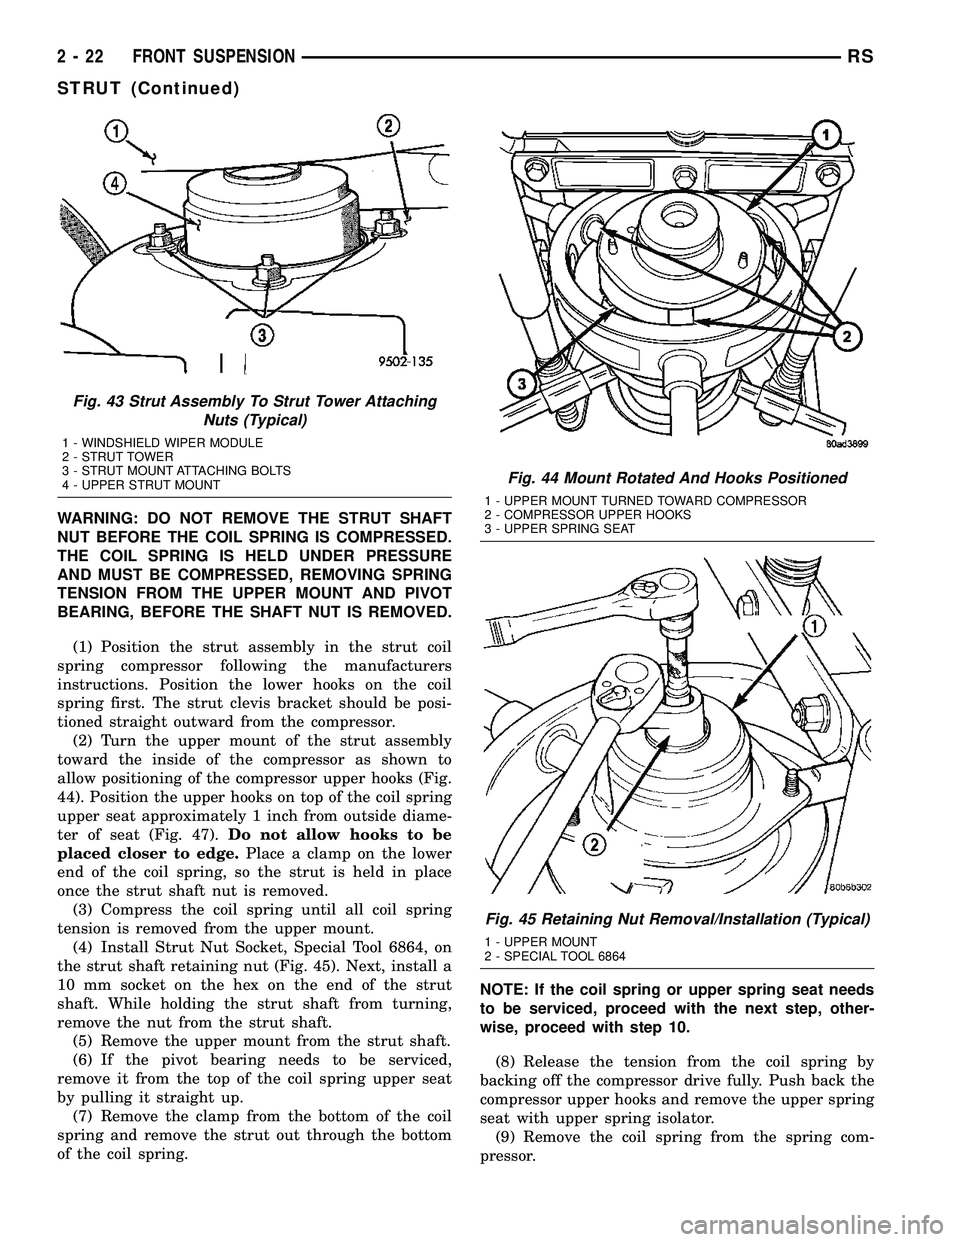 CHRYSLER VOYAGER 2005  Service Manual WARNING: DO NOT REMOVE THE STRUT SHAFT
NUT BEFORE THE COIL SPRING IS COMPRESSED.
THE COIL SPRING IS HELD UNDER PRESSURE
AND MUST BE COMPRESSED, REMOVING SPRING
TENSION FROM THE UPPER MOUNT AND PIVOT
B